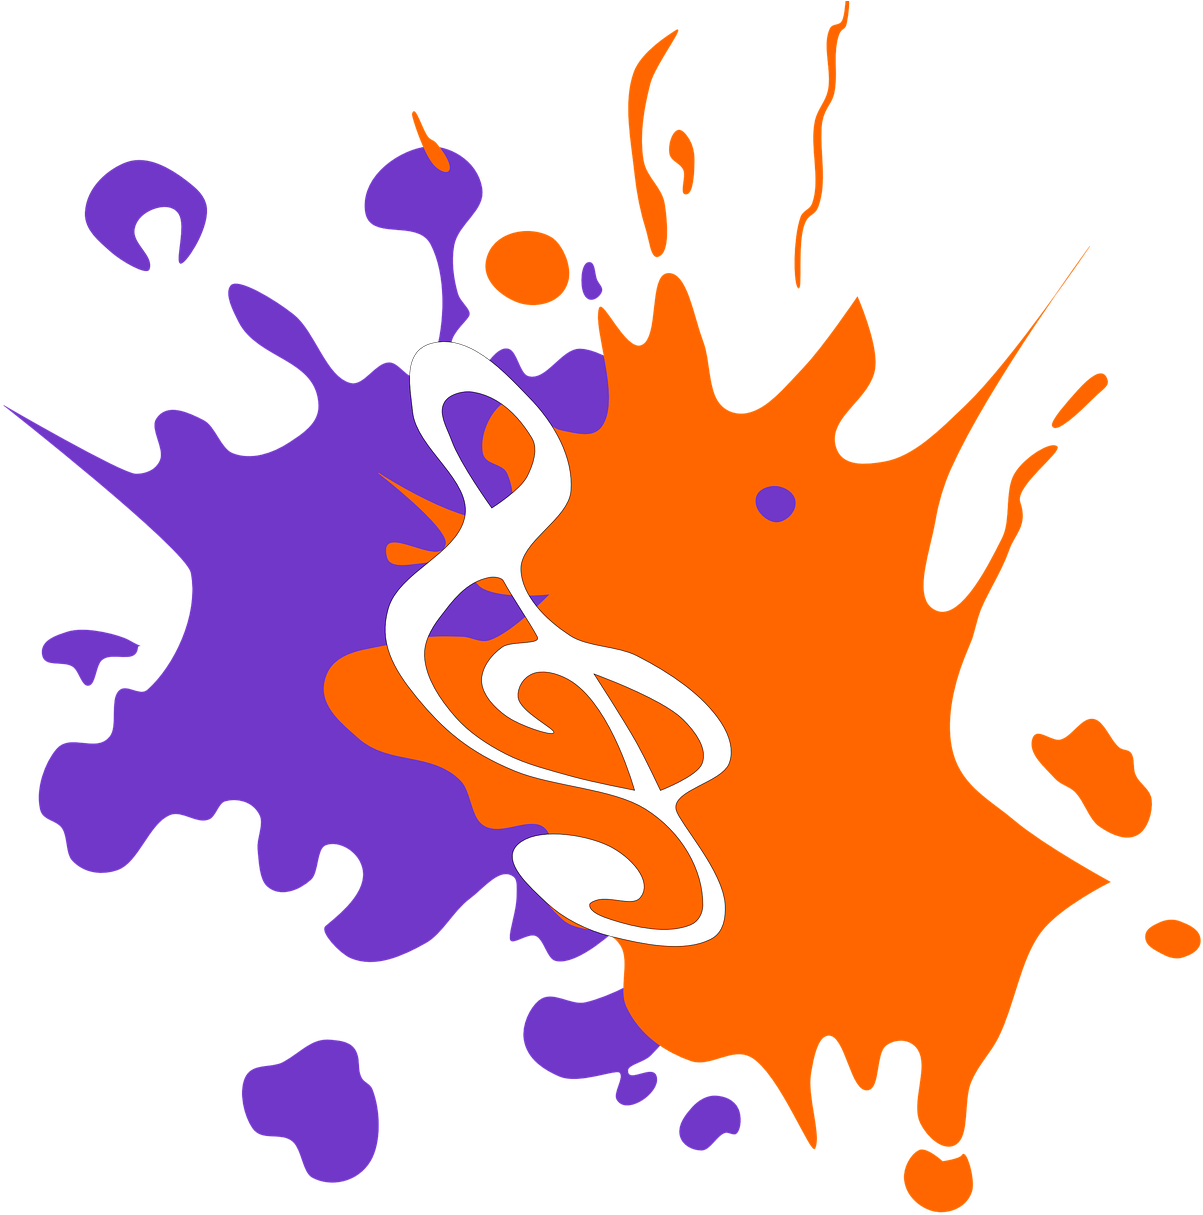 A White Treble Clef And Purple And Orange Paint Splashes